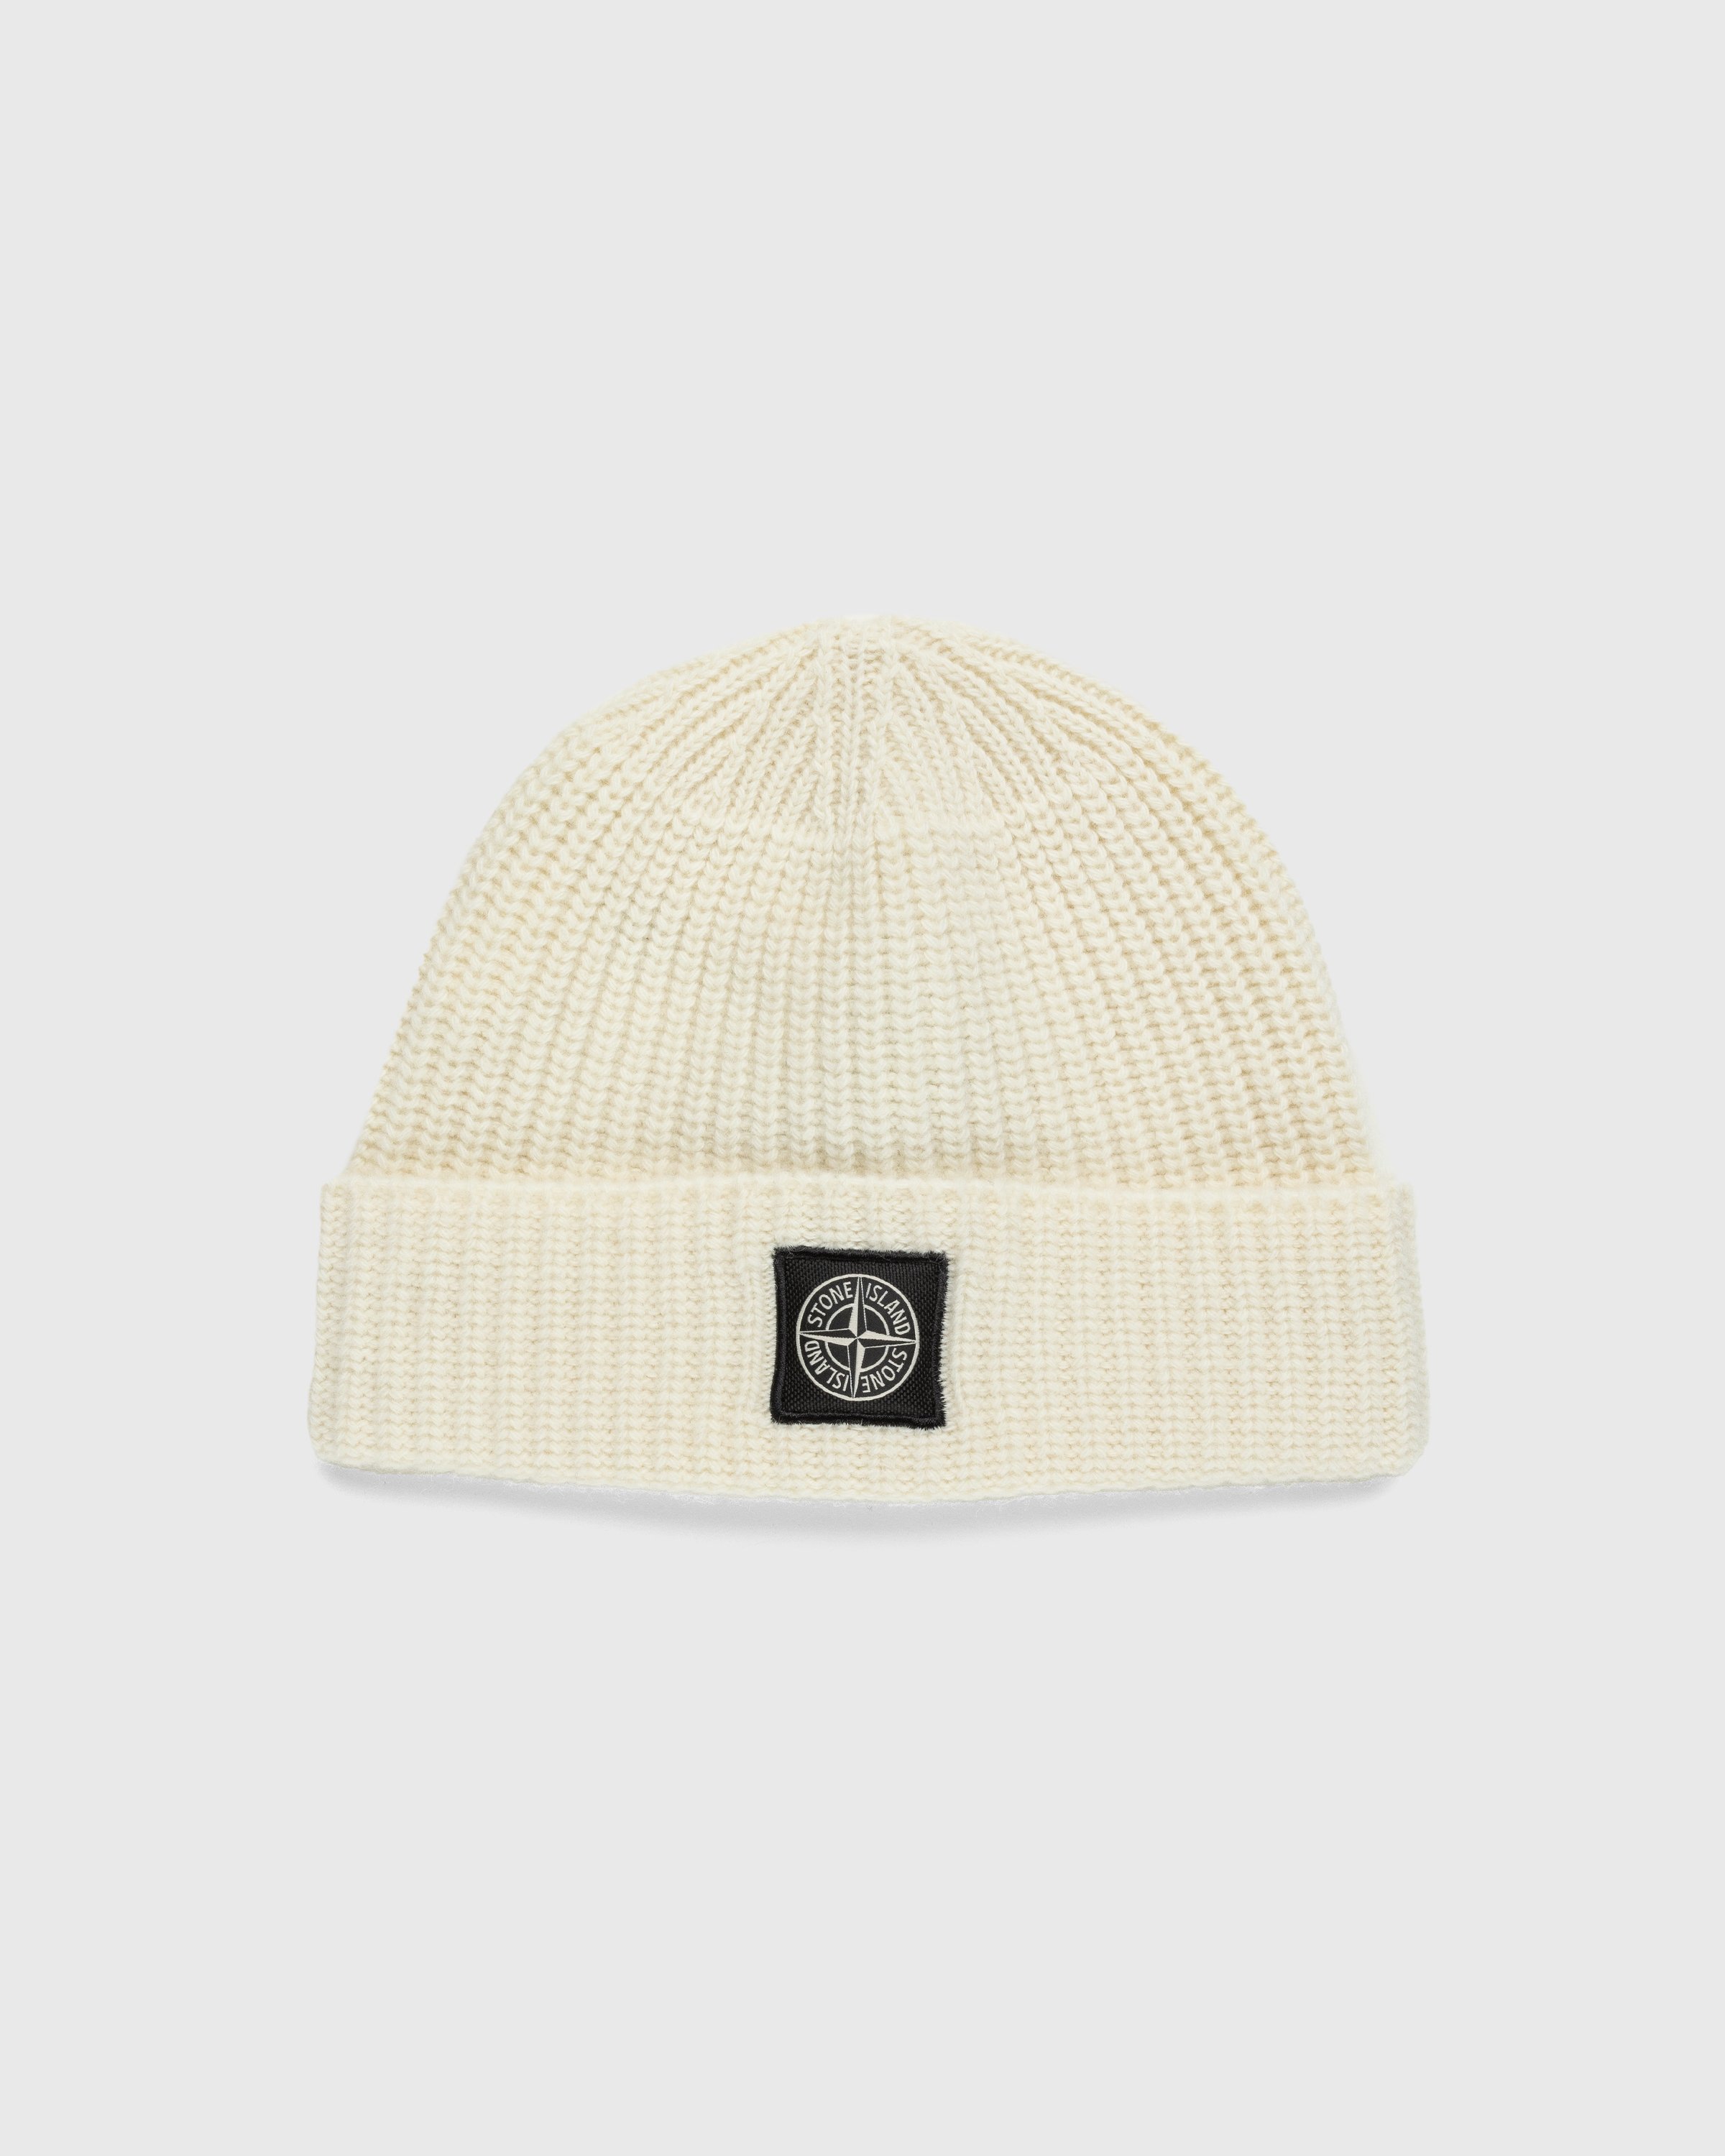 Stone Island - Ribbed Wool Beanie Natural - Accessories - Beige - Image 1